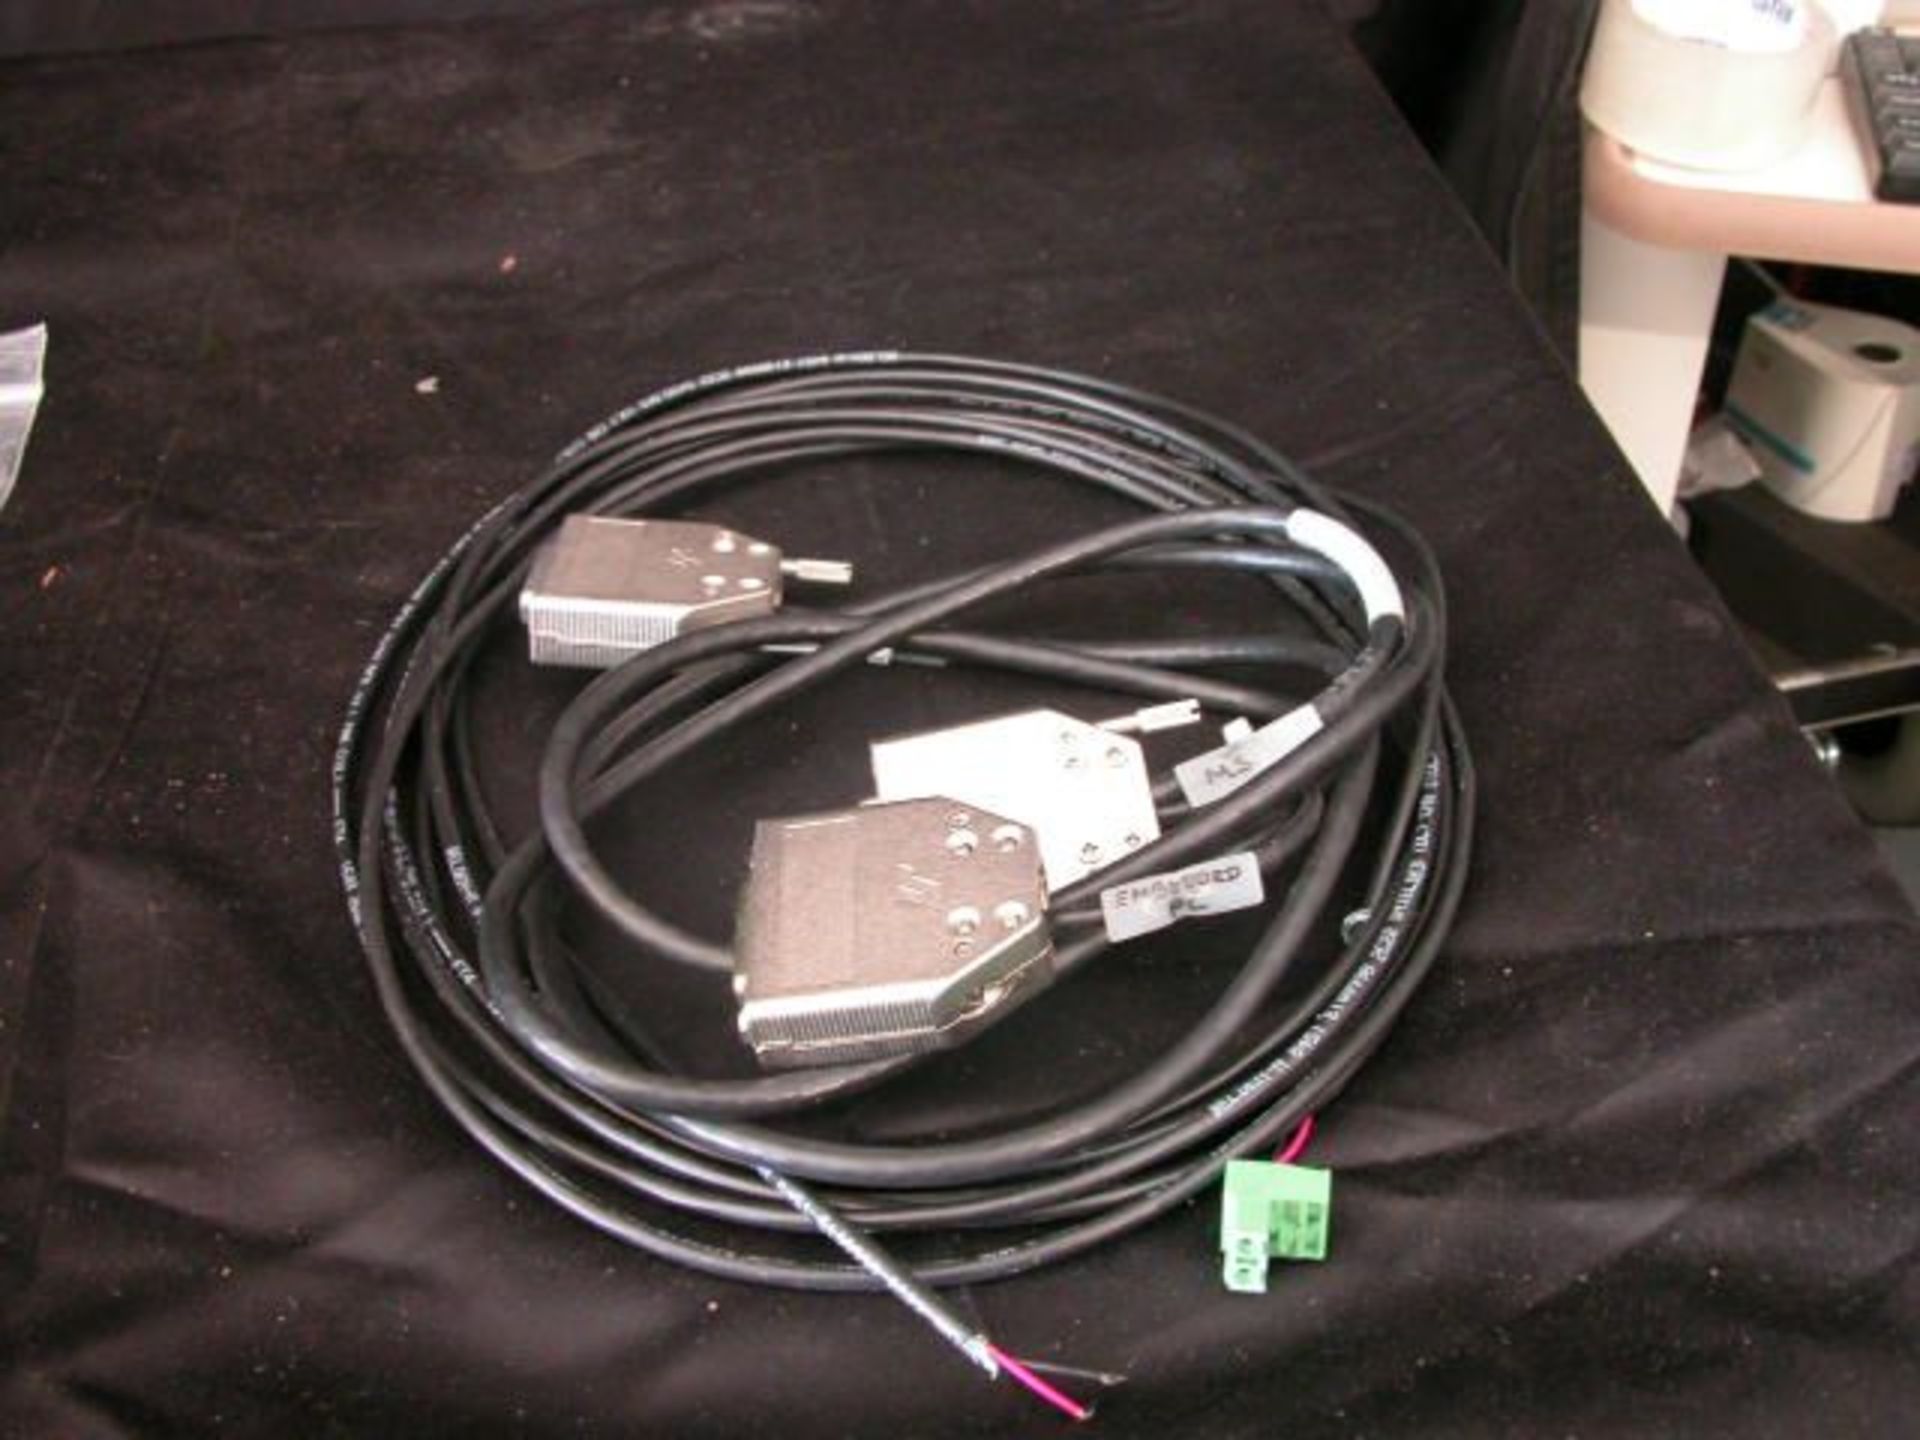 Waters/Micromass Q-Tof Ultima Mass Spectrometer P.M. KIT W/ Extras, Qty 1, 321118842113 - Image 11 of 13